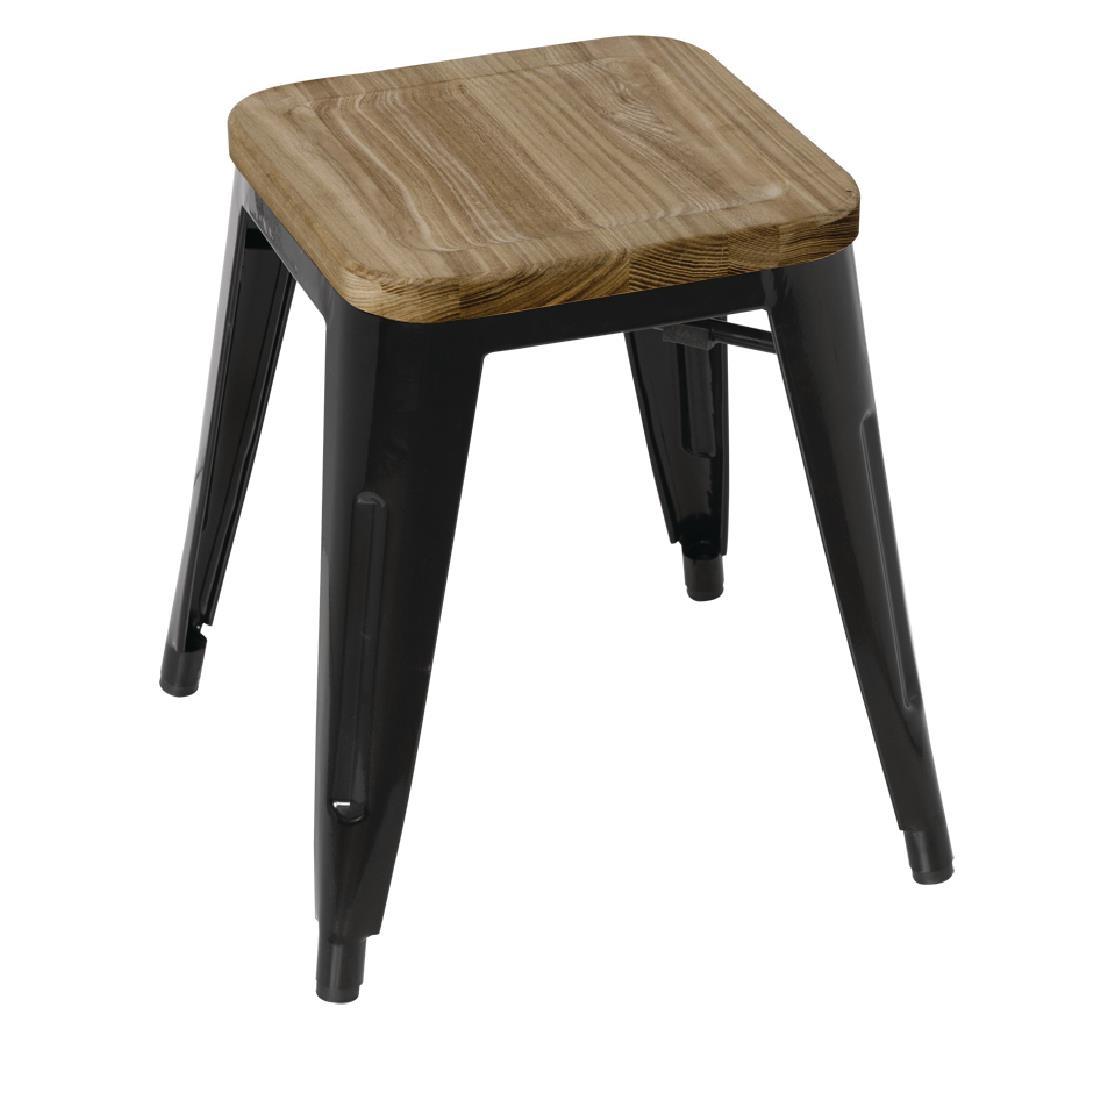 Bolero Bistro Low Stools with Wooden Seat Pad Black (Pack of 4) - GM635  - 1